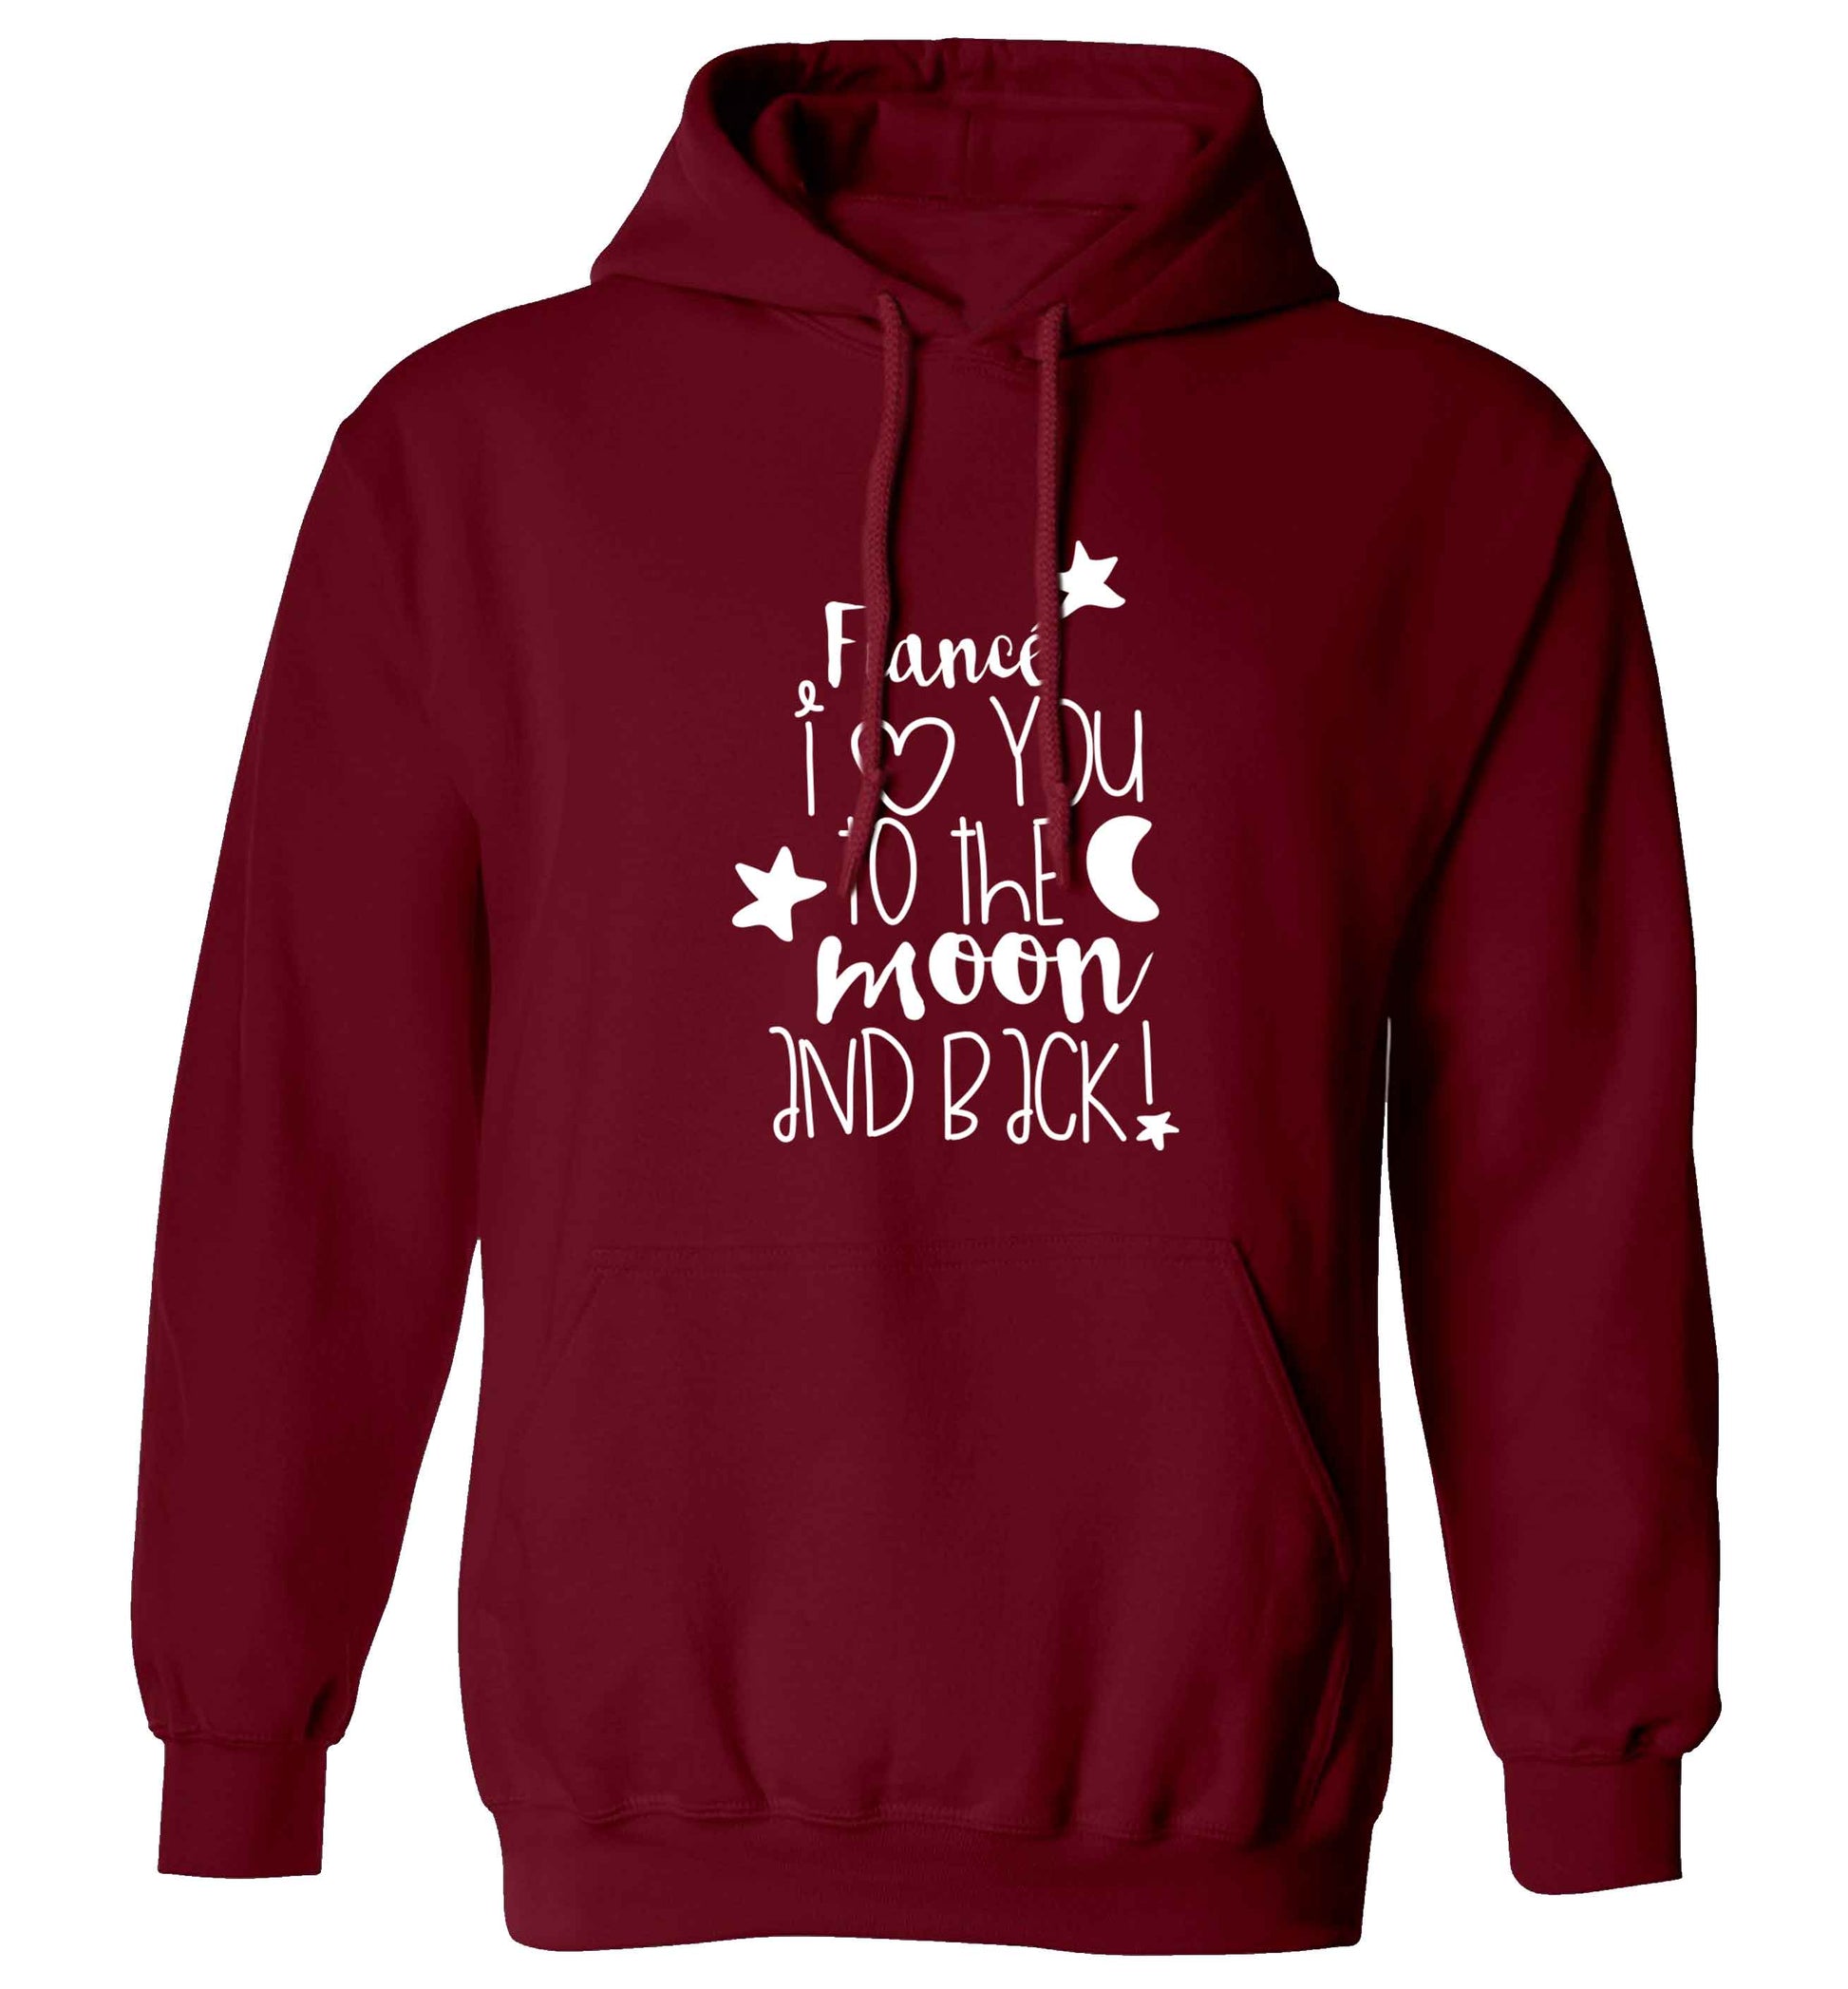 Fianc√© I love you to the moon and back adults unisex maroon hoodie 2XL